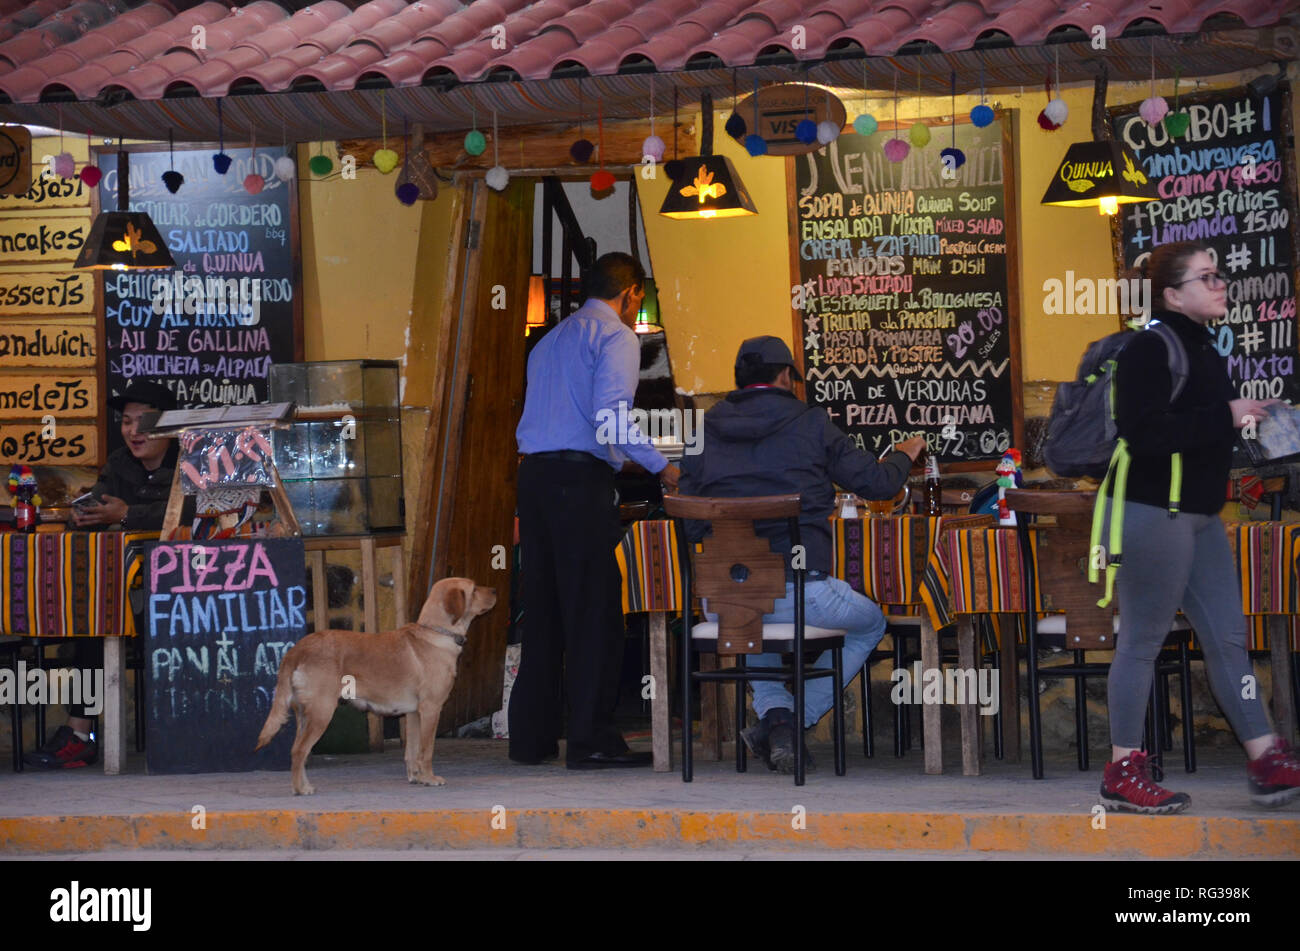 OLLANTAYTAMBO / PERU, August 15, 2018 : A dog watches dinner being served in a restaurant in the main square of Ollantaytambo. Stock Photo